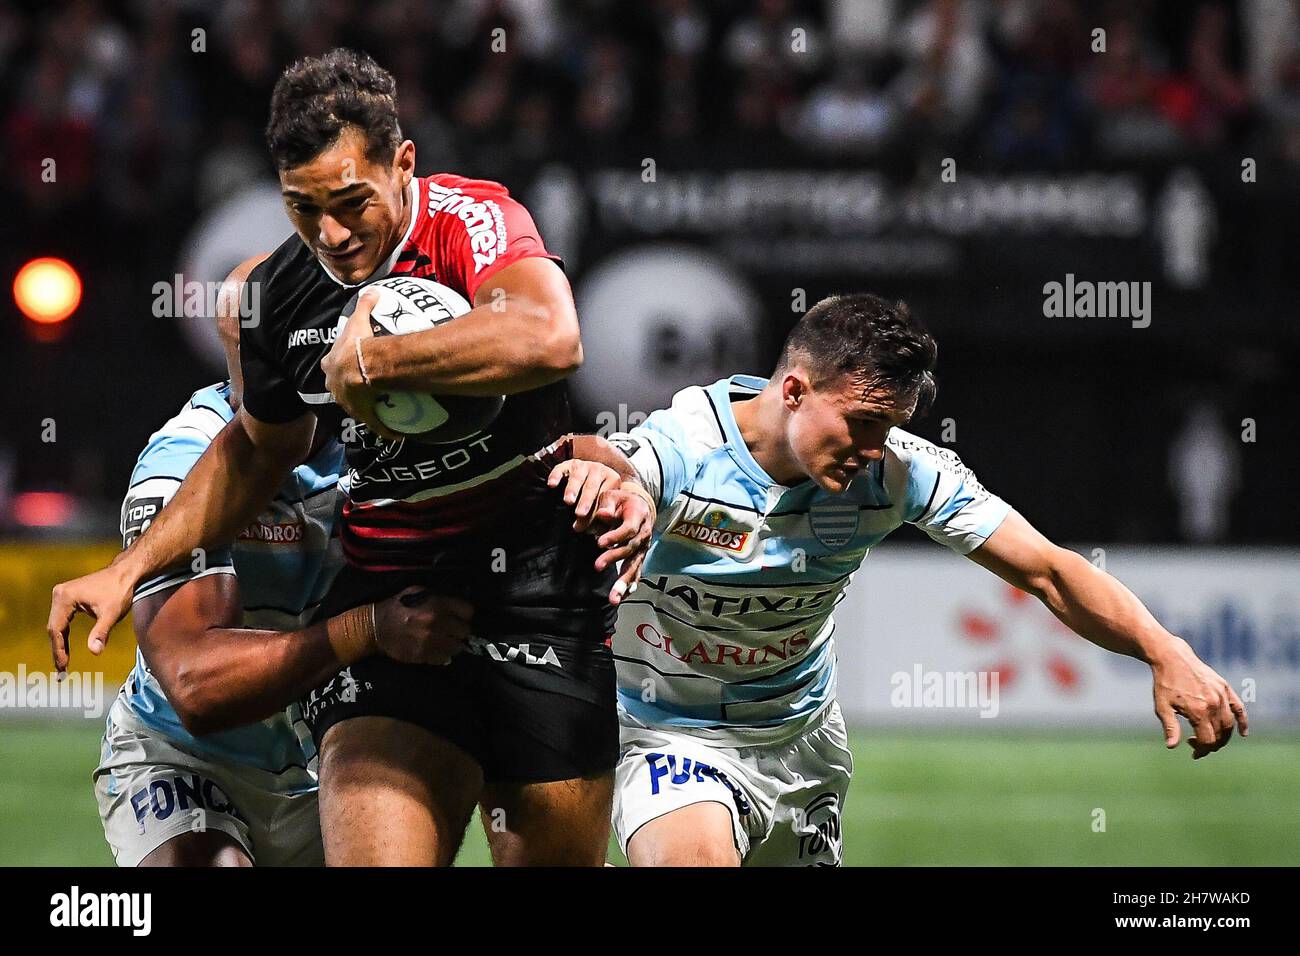 Dimitri DELIBES of Toulouse and Max SPRING of Racing 92 during the French  championship Top 14 rugby union match between Racing 92 and Stade  Toulousain on October 31, 2021 at Paris La